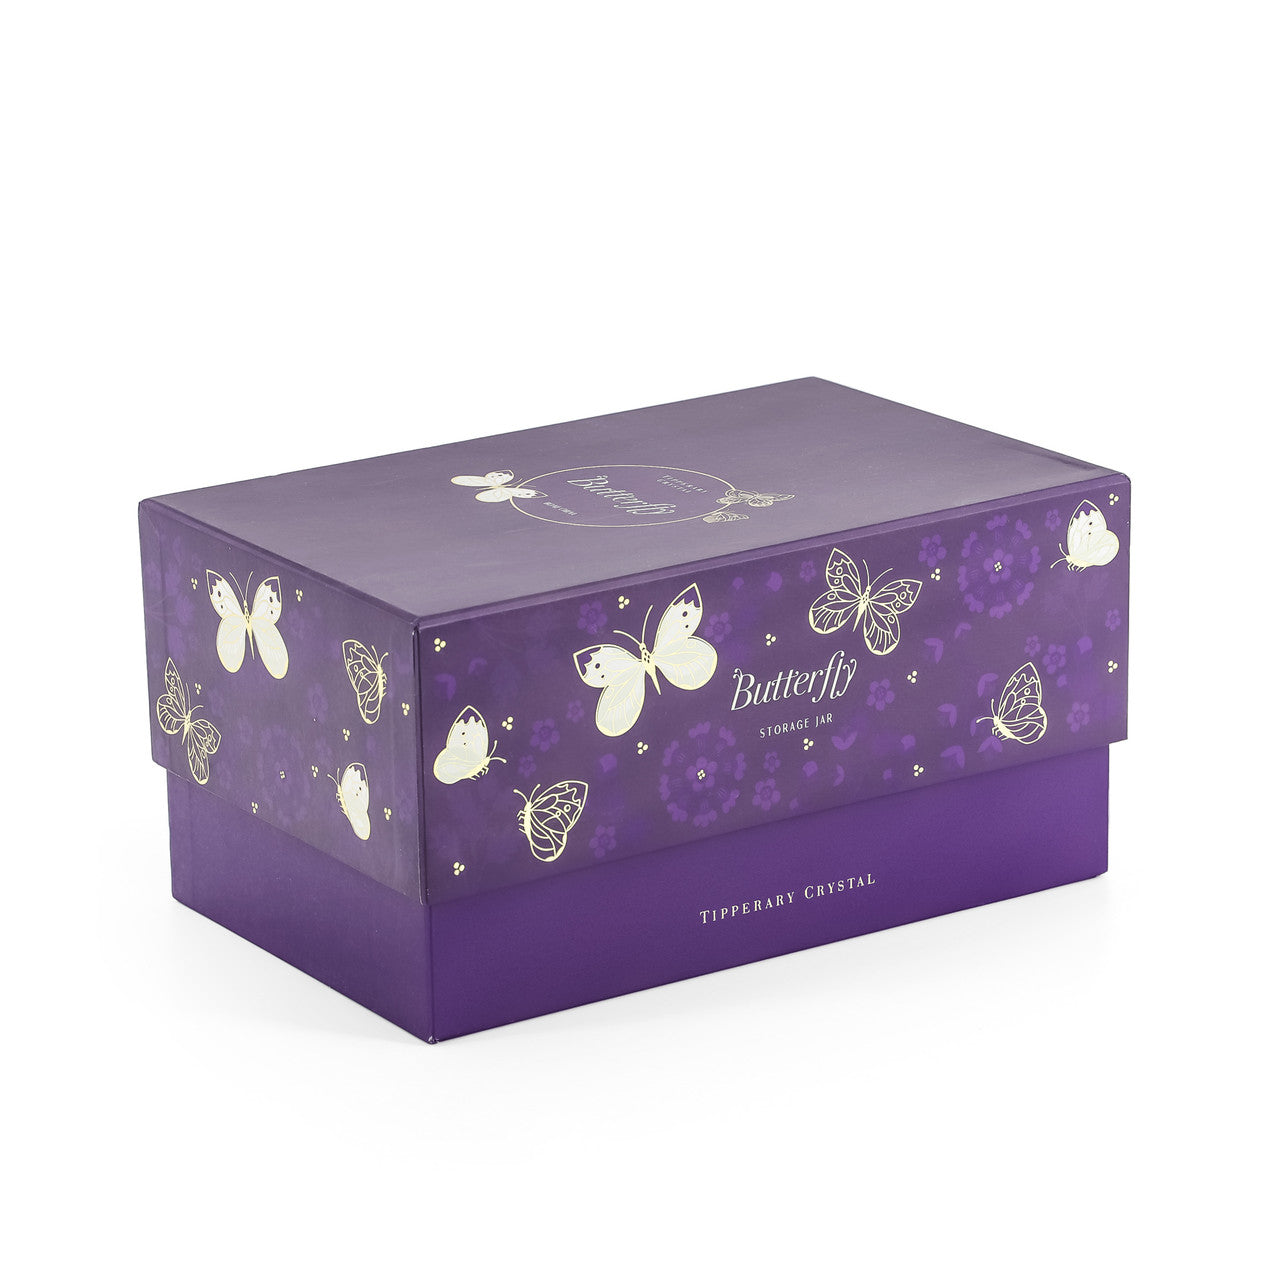 Tipperary Crystal Butterfly Storage Jar - New 2022  Drawing inspiration from urban garden, the Tipperary Crystal Butterfly collection transforms an icon into something modern and unexpected. Playful and elegant, this collection draws from the inherent beauty of the butterfly.